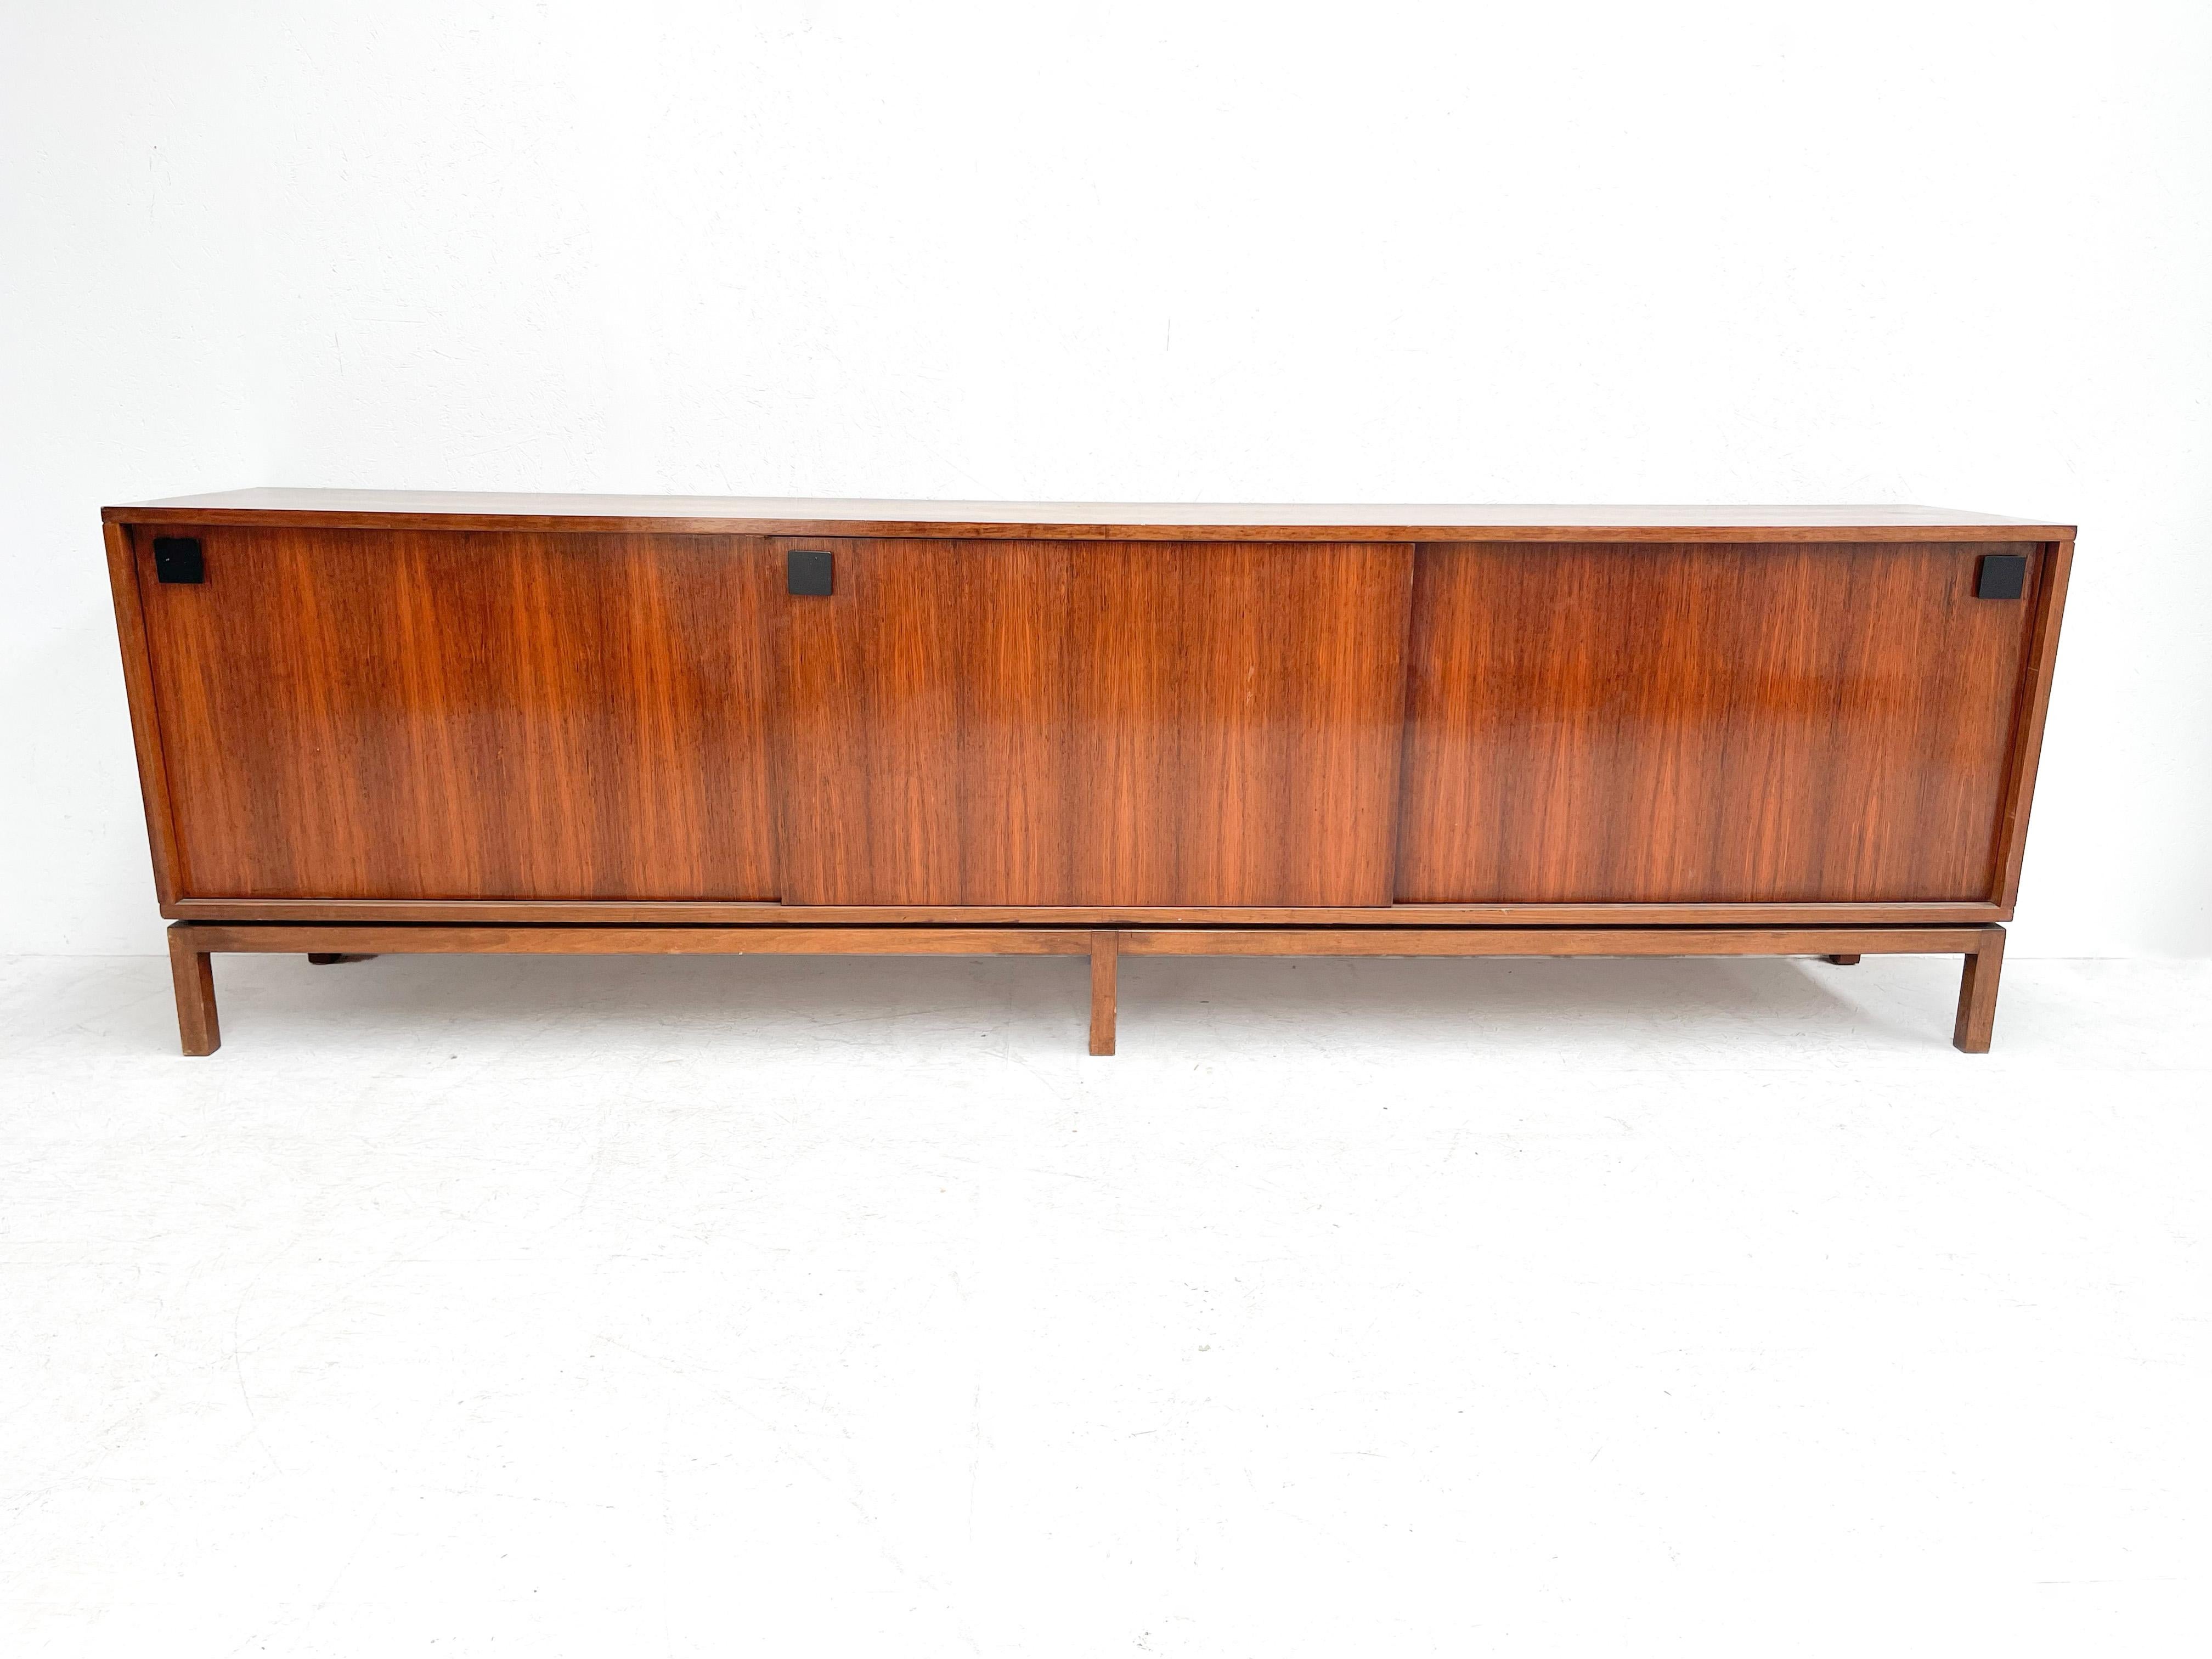 Alfred Hendrickx rosewood sideboard
This sideboard was designed by one of Belgium's most famous designers Alfred Hendrickx. He designed it in the 1960s for the Belgian manufacturer Belform. 
 
The sideboard has three sliding doors with black